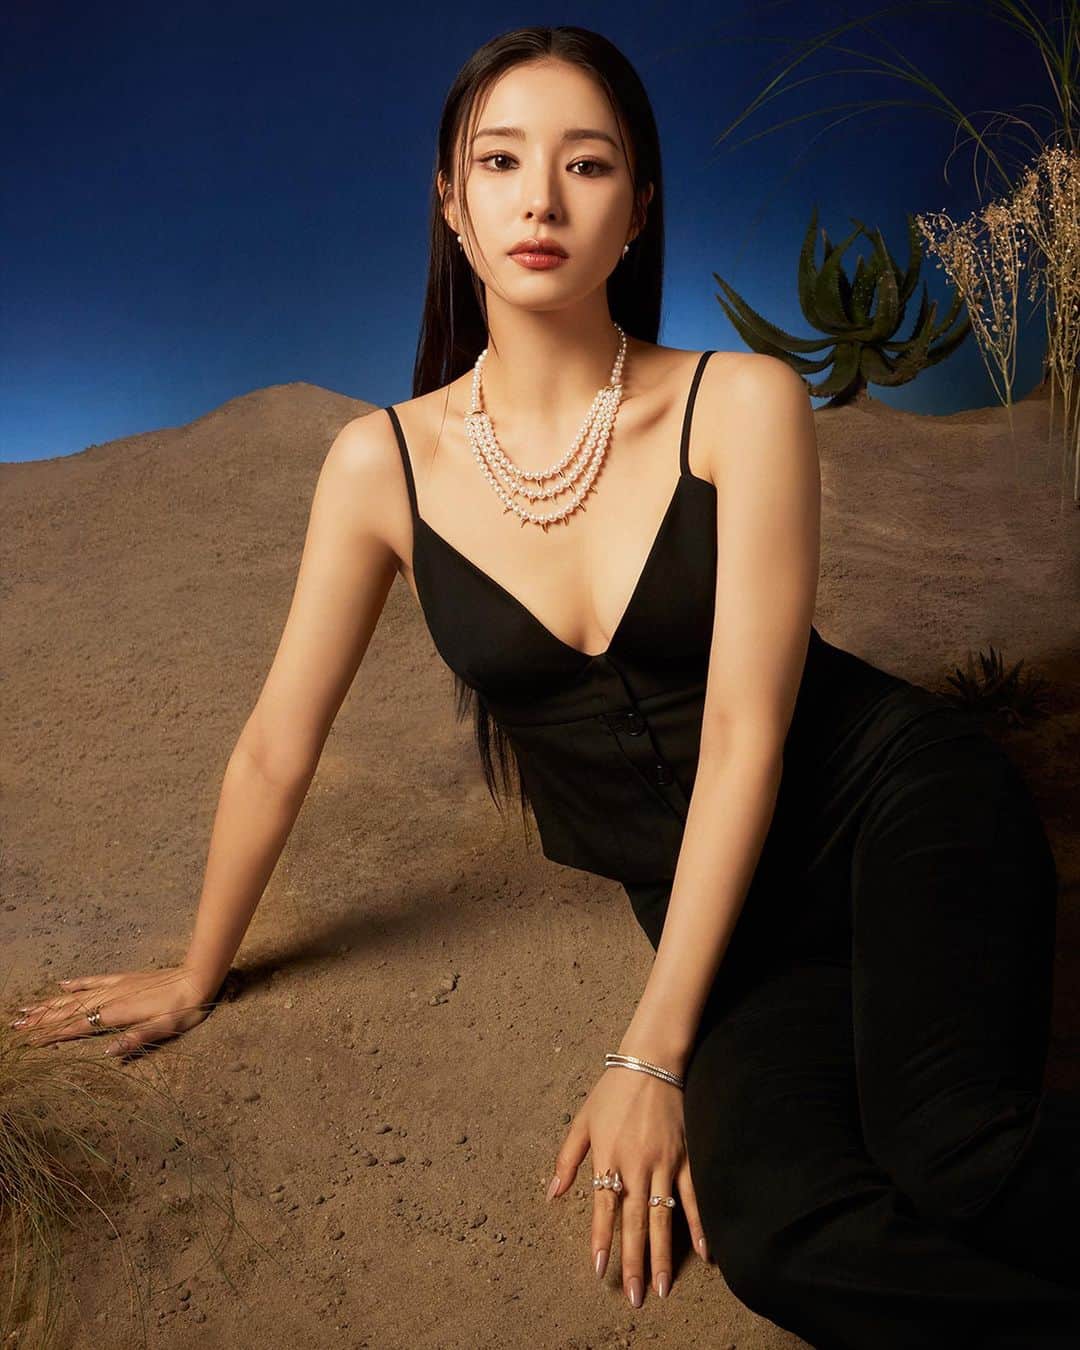 TASAKIのインスタグラム：「Korean actress SaeKyeong Shin (@sjkuksee) wears exquisite jewellery from our danger collection. She presents her sensual and charismatic appearance with danger jewellery, conveying TASAKI's spirit of Timeless Beauty.   #TASAKI #TASAKIdanger #ShinSaeKyeong #타사키 #타사키데인저 #신세경」